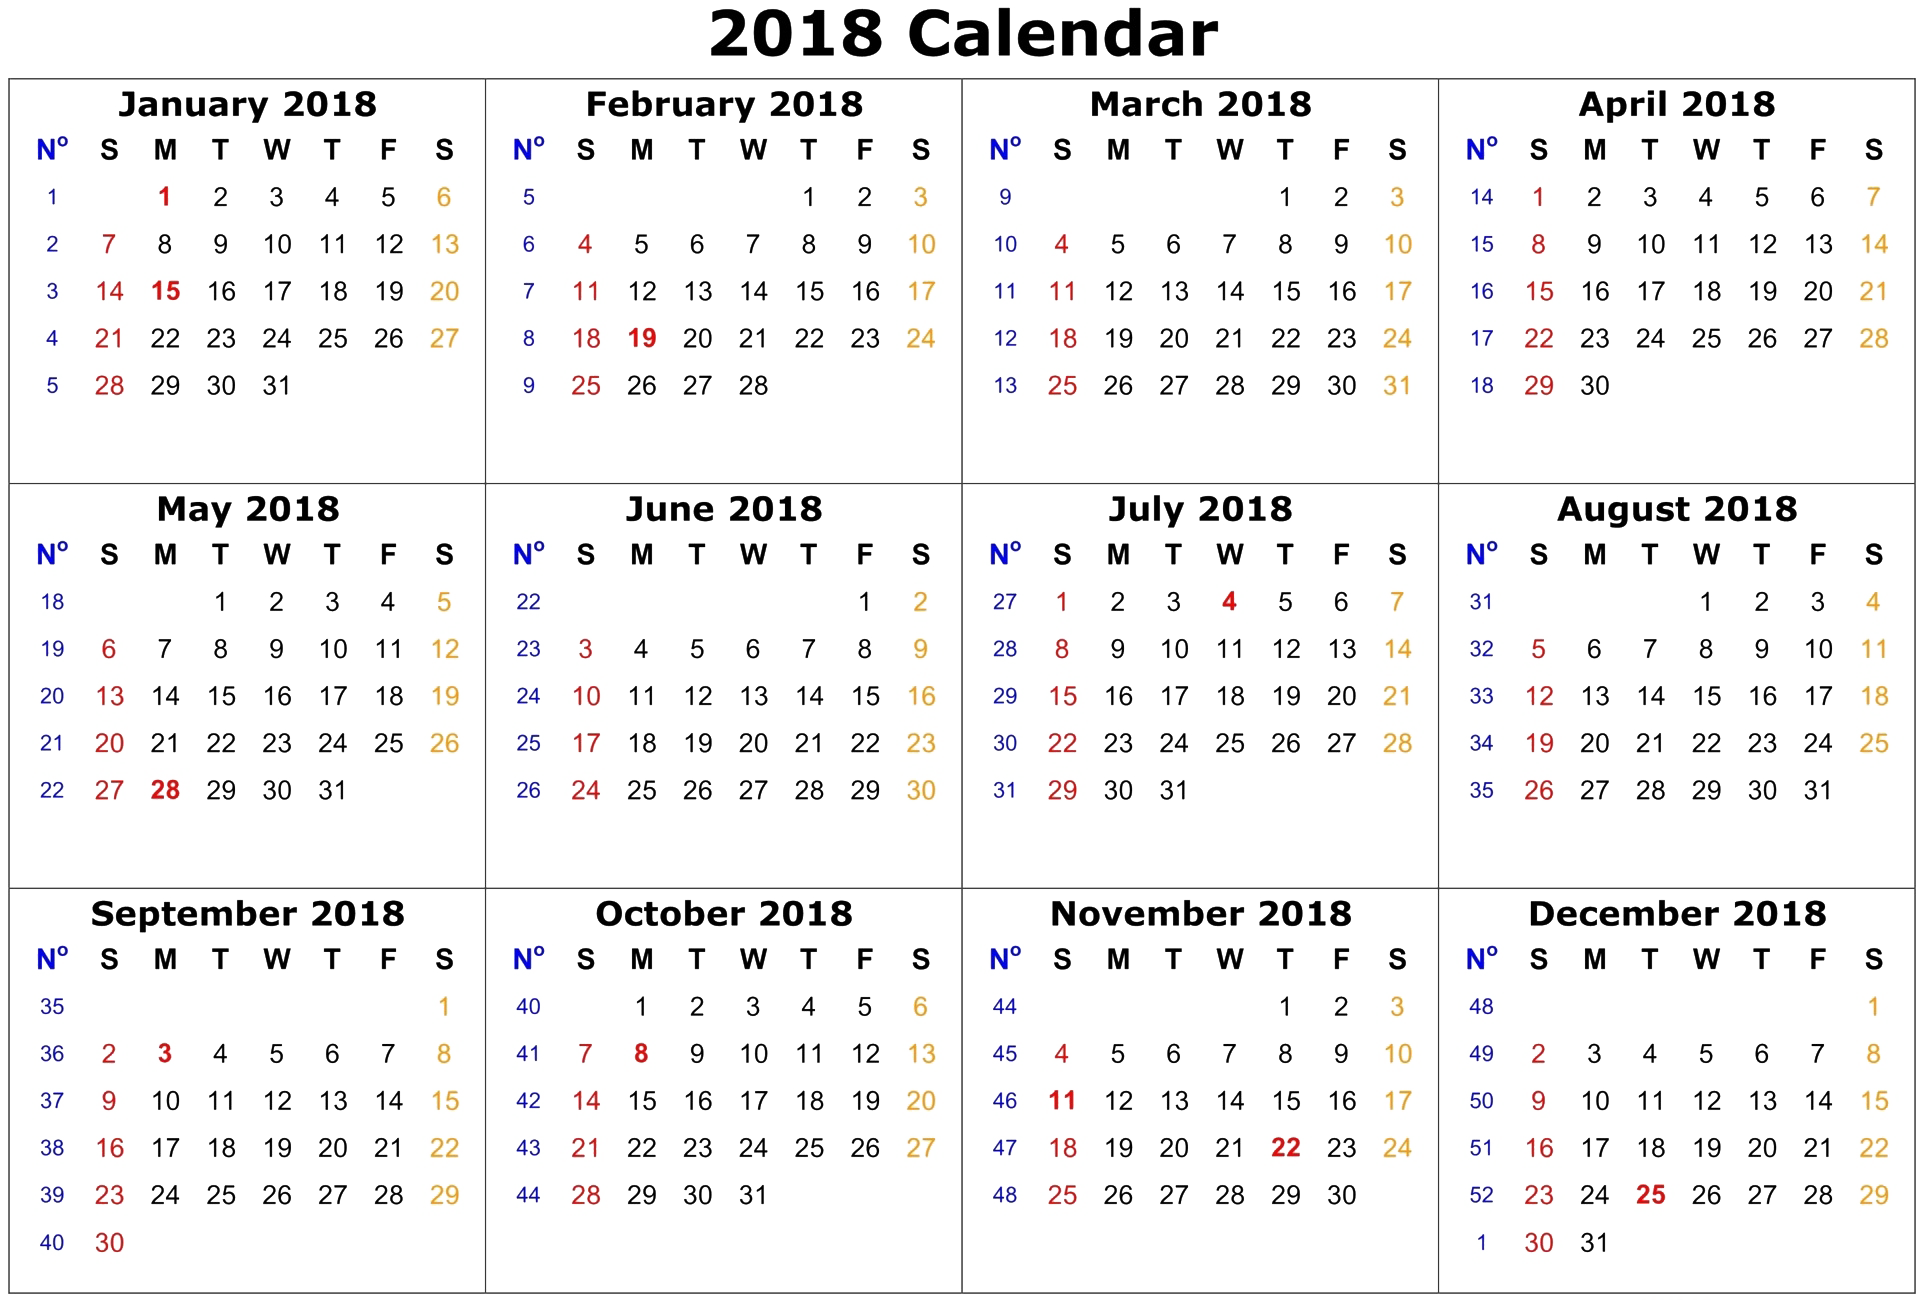 2018 Calendar PNG Pic Background